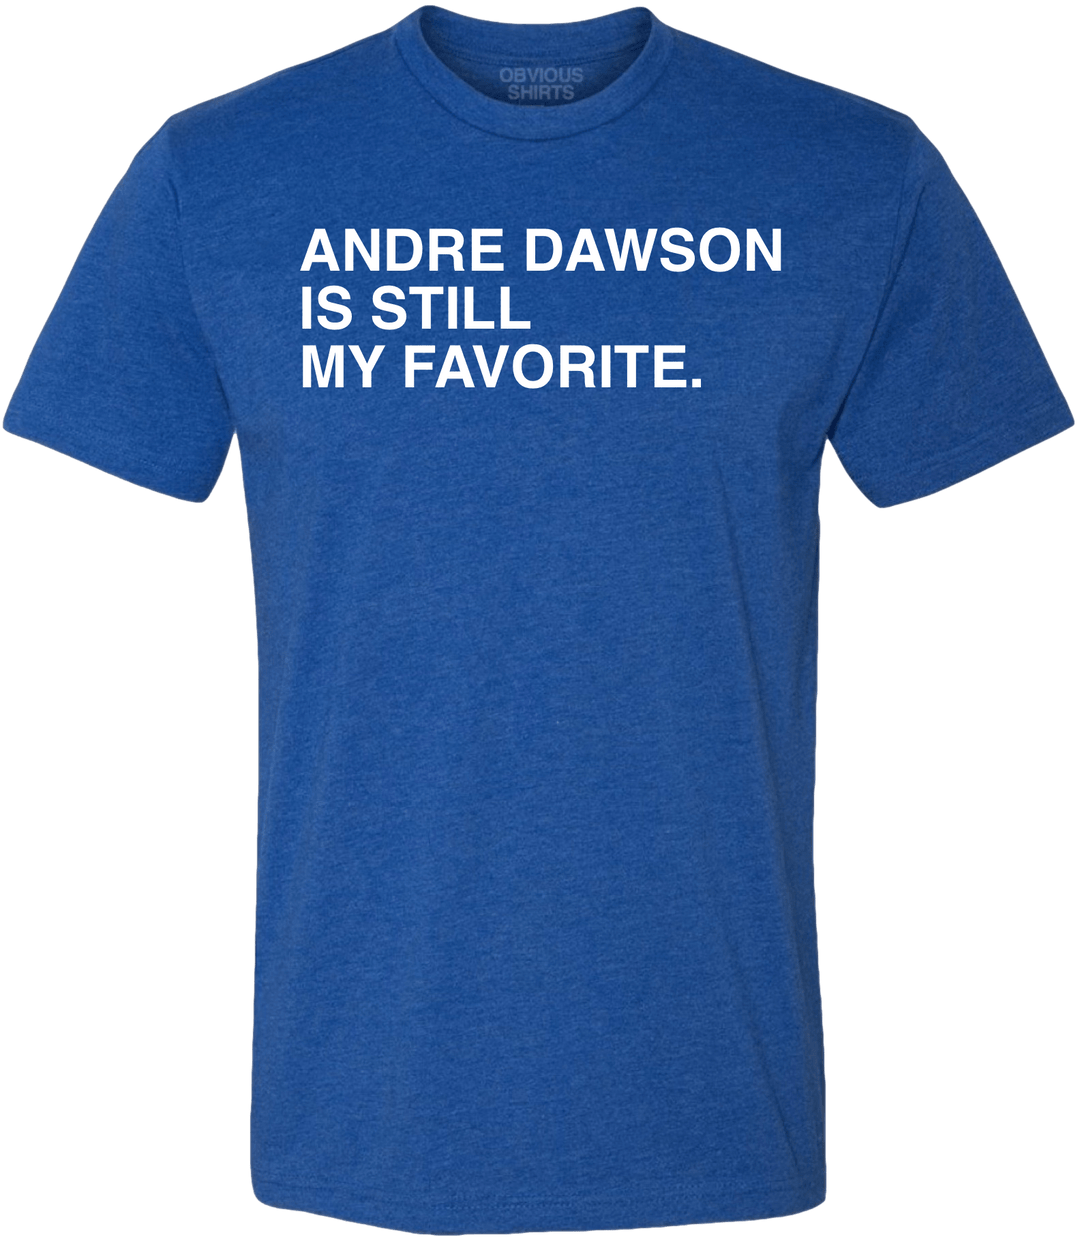 ANDRE DAWSON IS STILL MY FAVORITE. - OBVIOUS SHIRTS